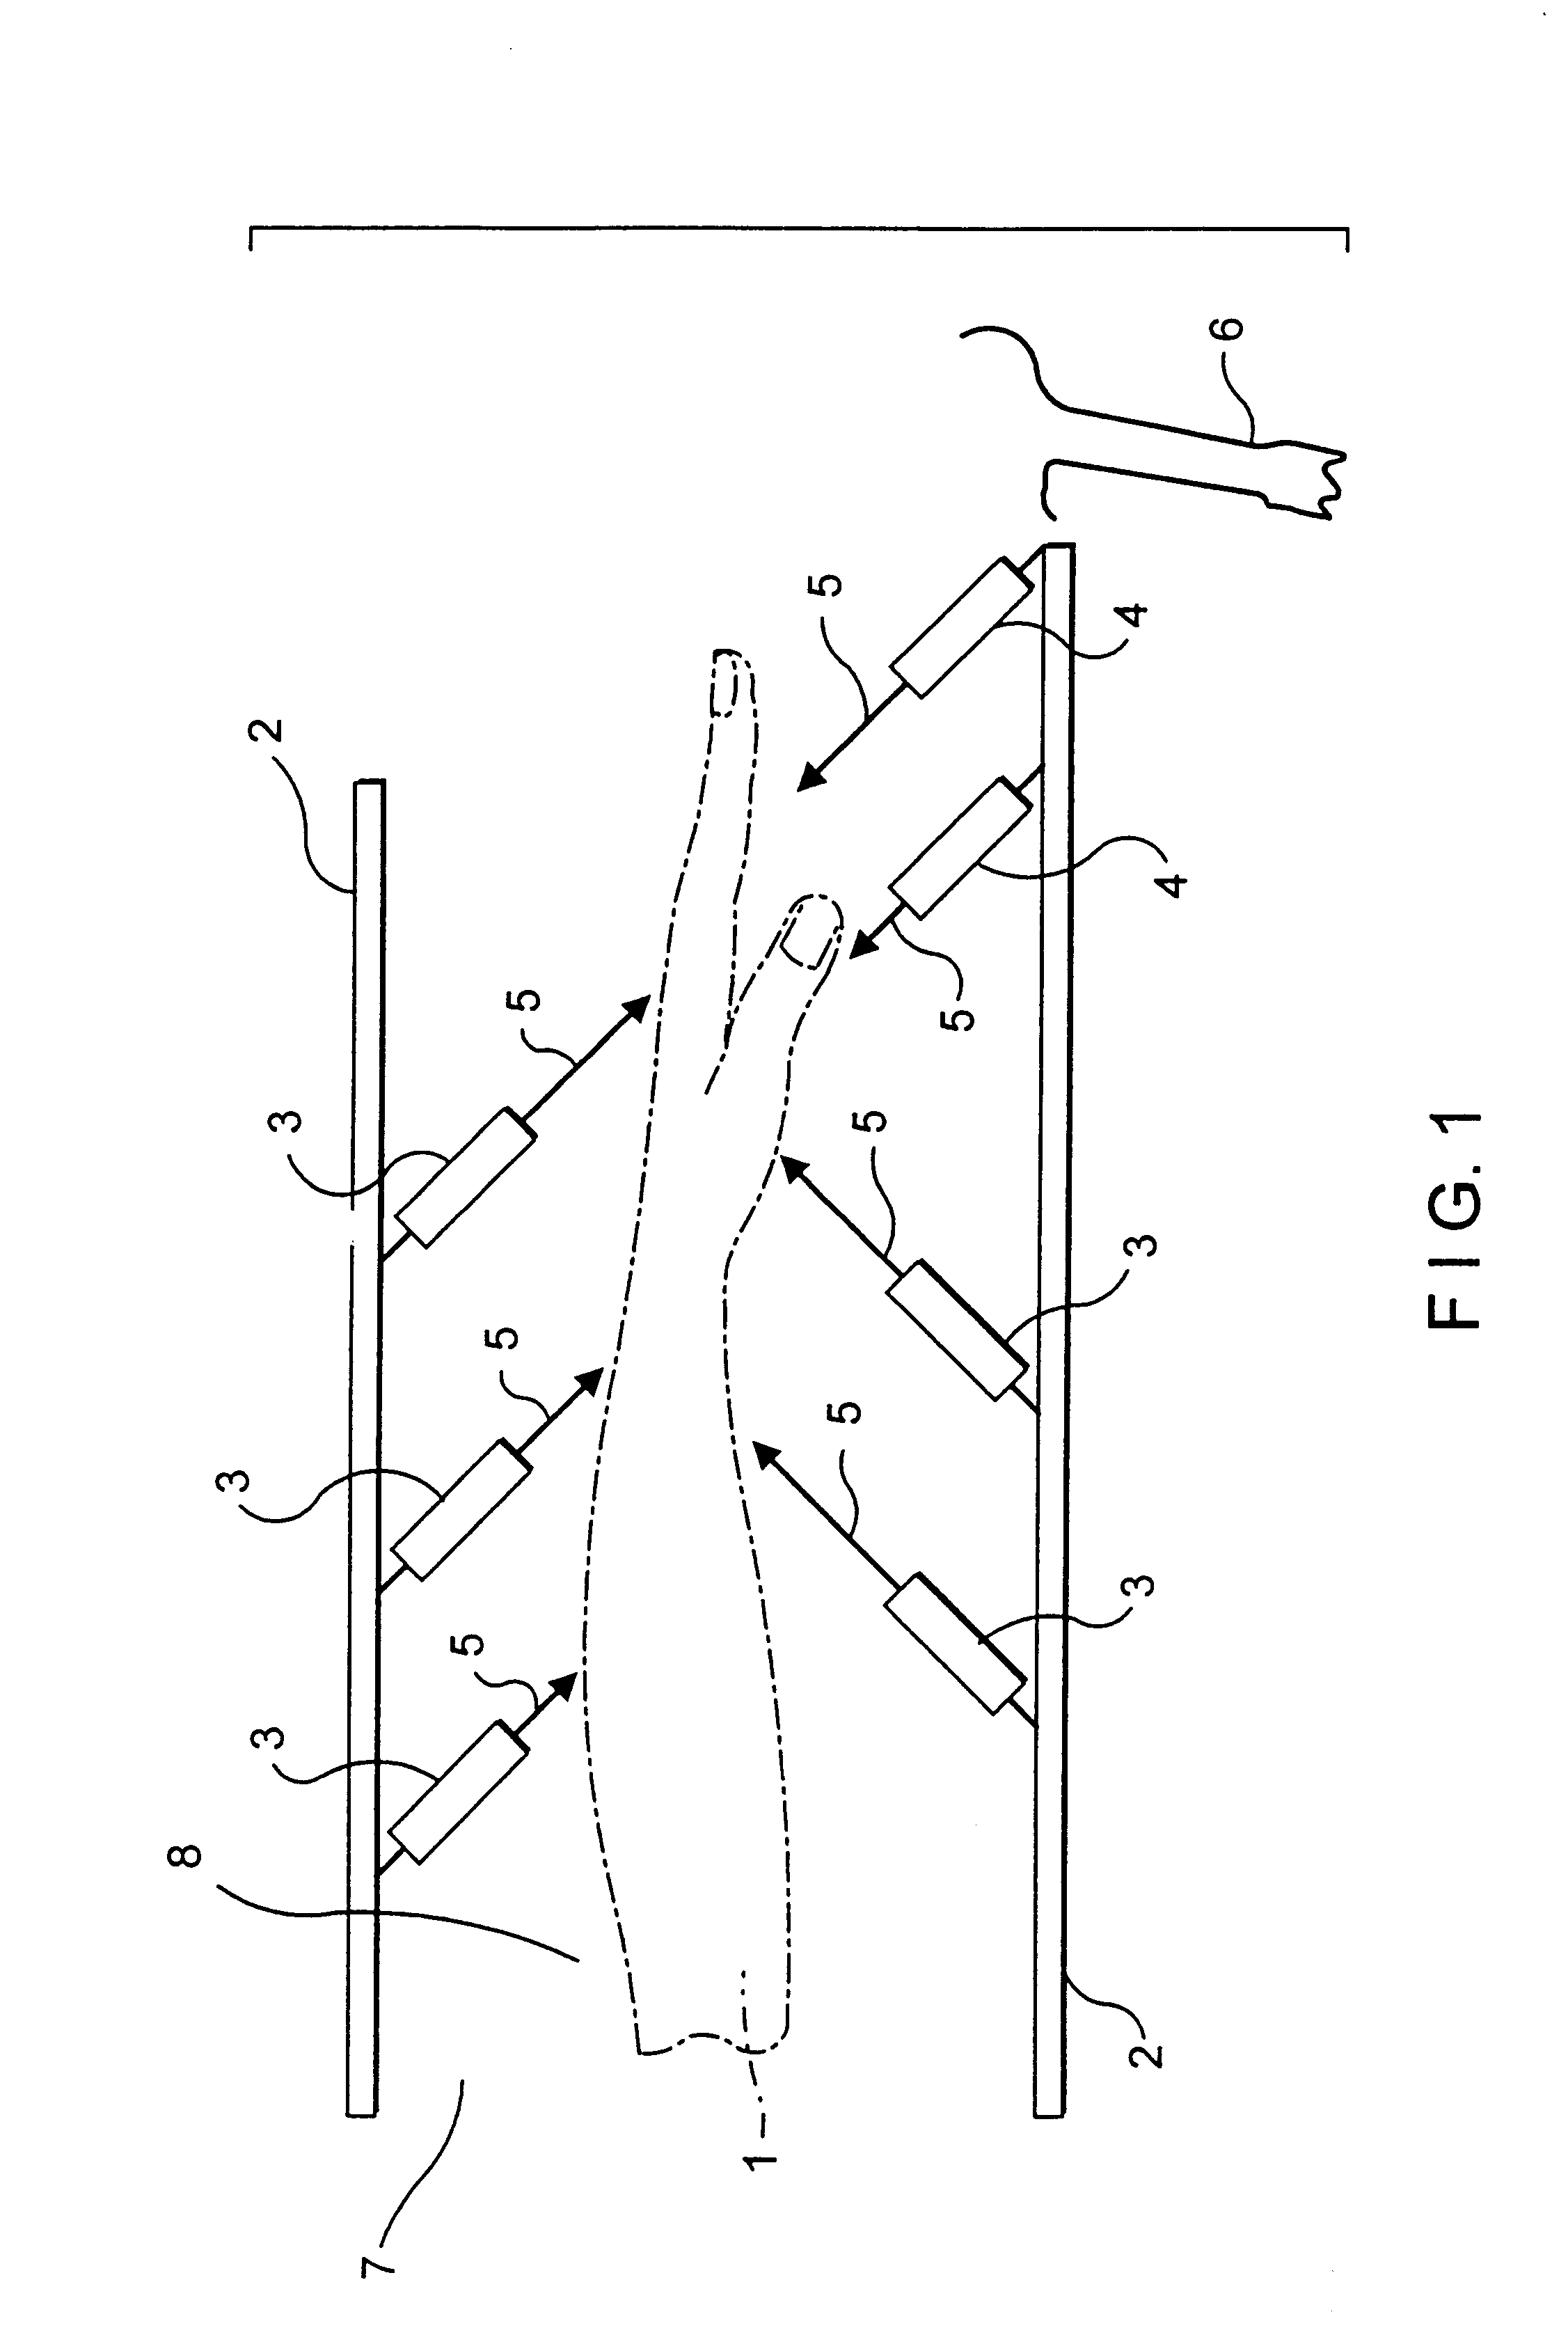 Method of removing contaminants from an epidermal surface using an oscillating fluidic spray